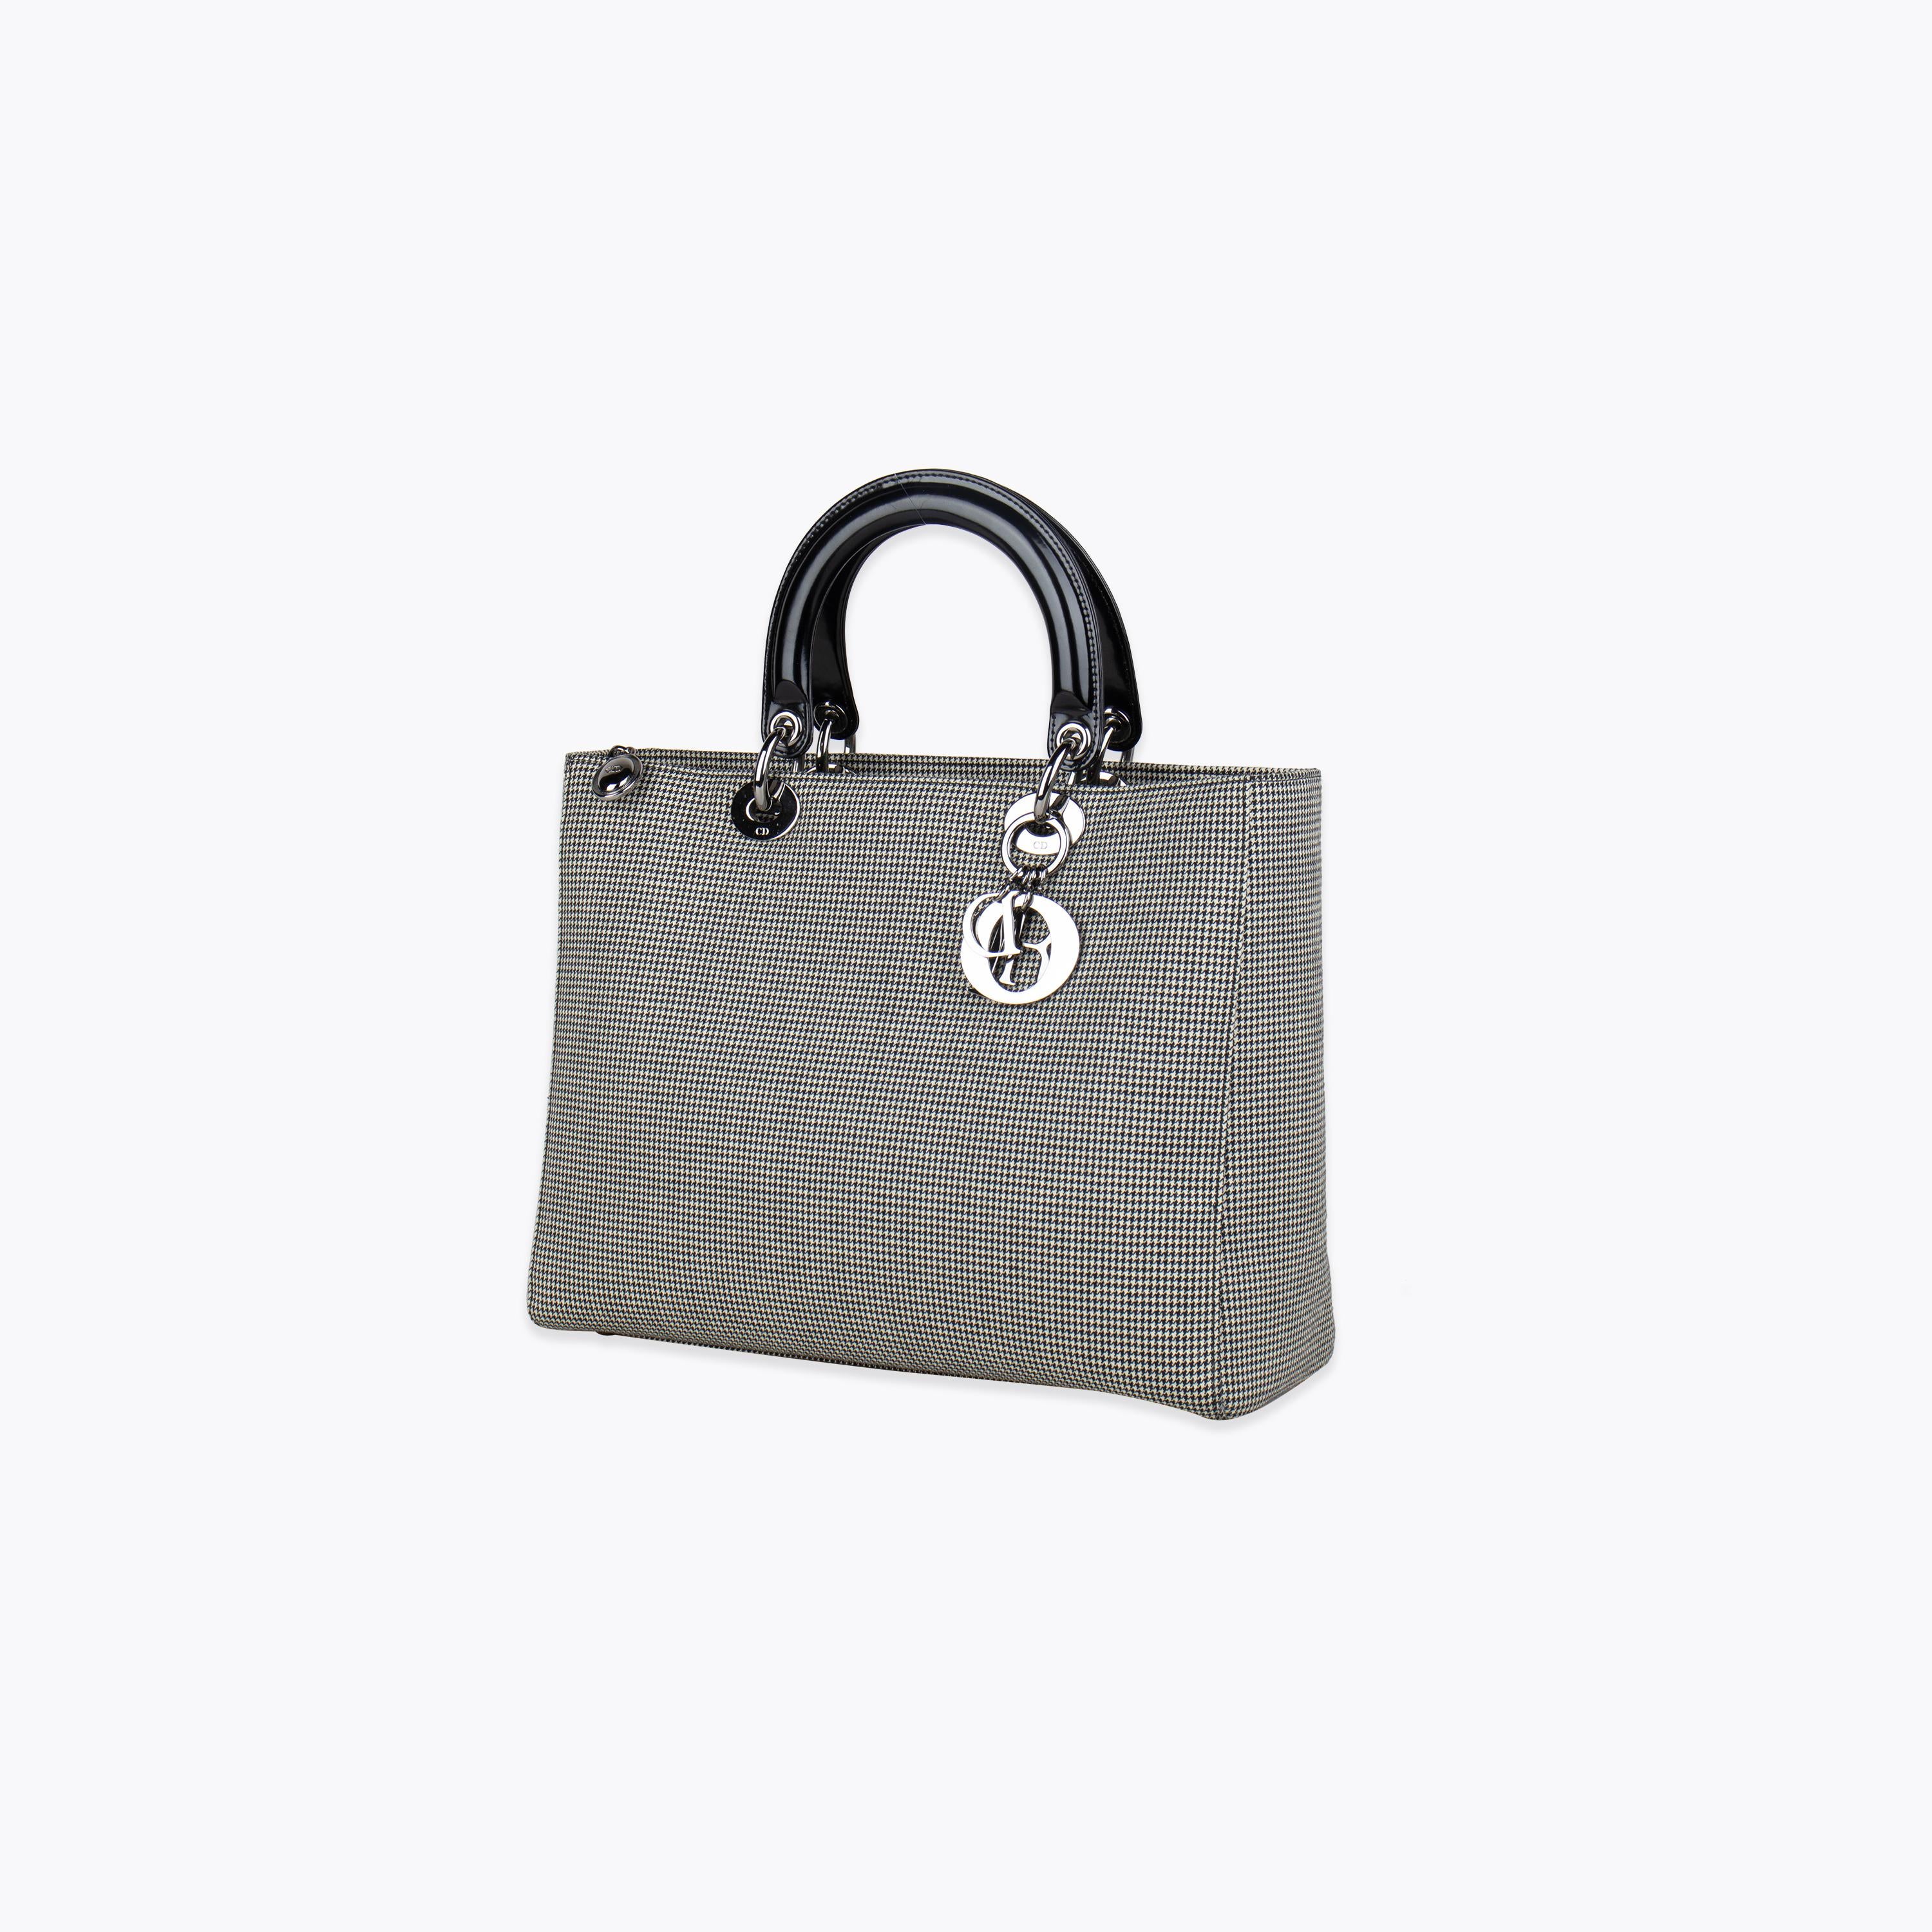 Black & White Christian DiorTweed Large Lady Dior

– Silver-tone hardware
– Flat Handles
– Single slit pocket with pull-through closure at front flap
– Textile Lining & single interior pocket
– Zip Closure at Top
–Single detachable flat shoulder